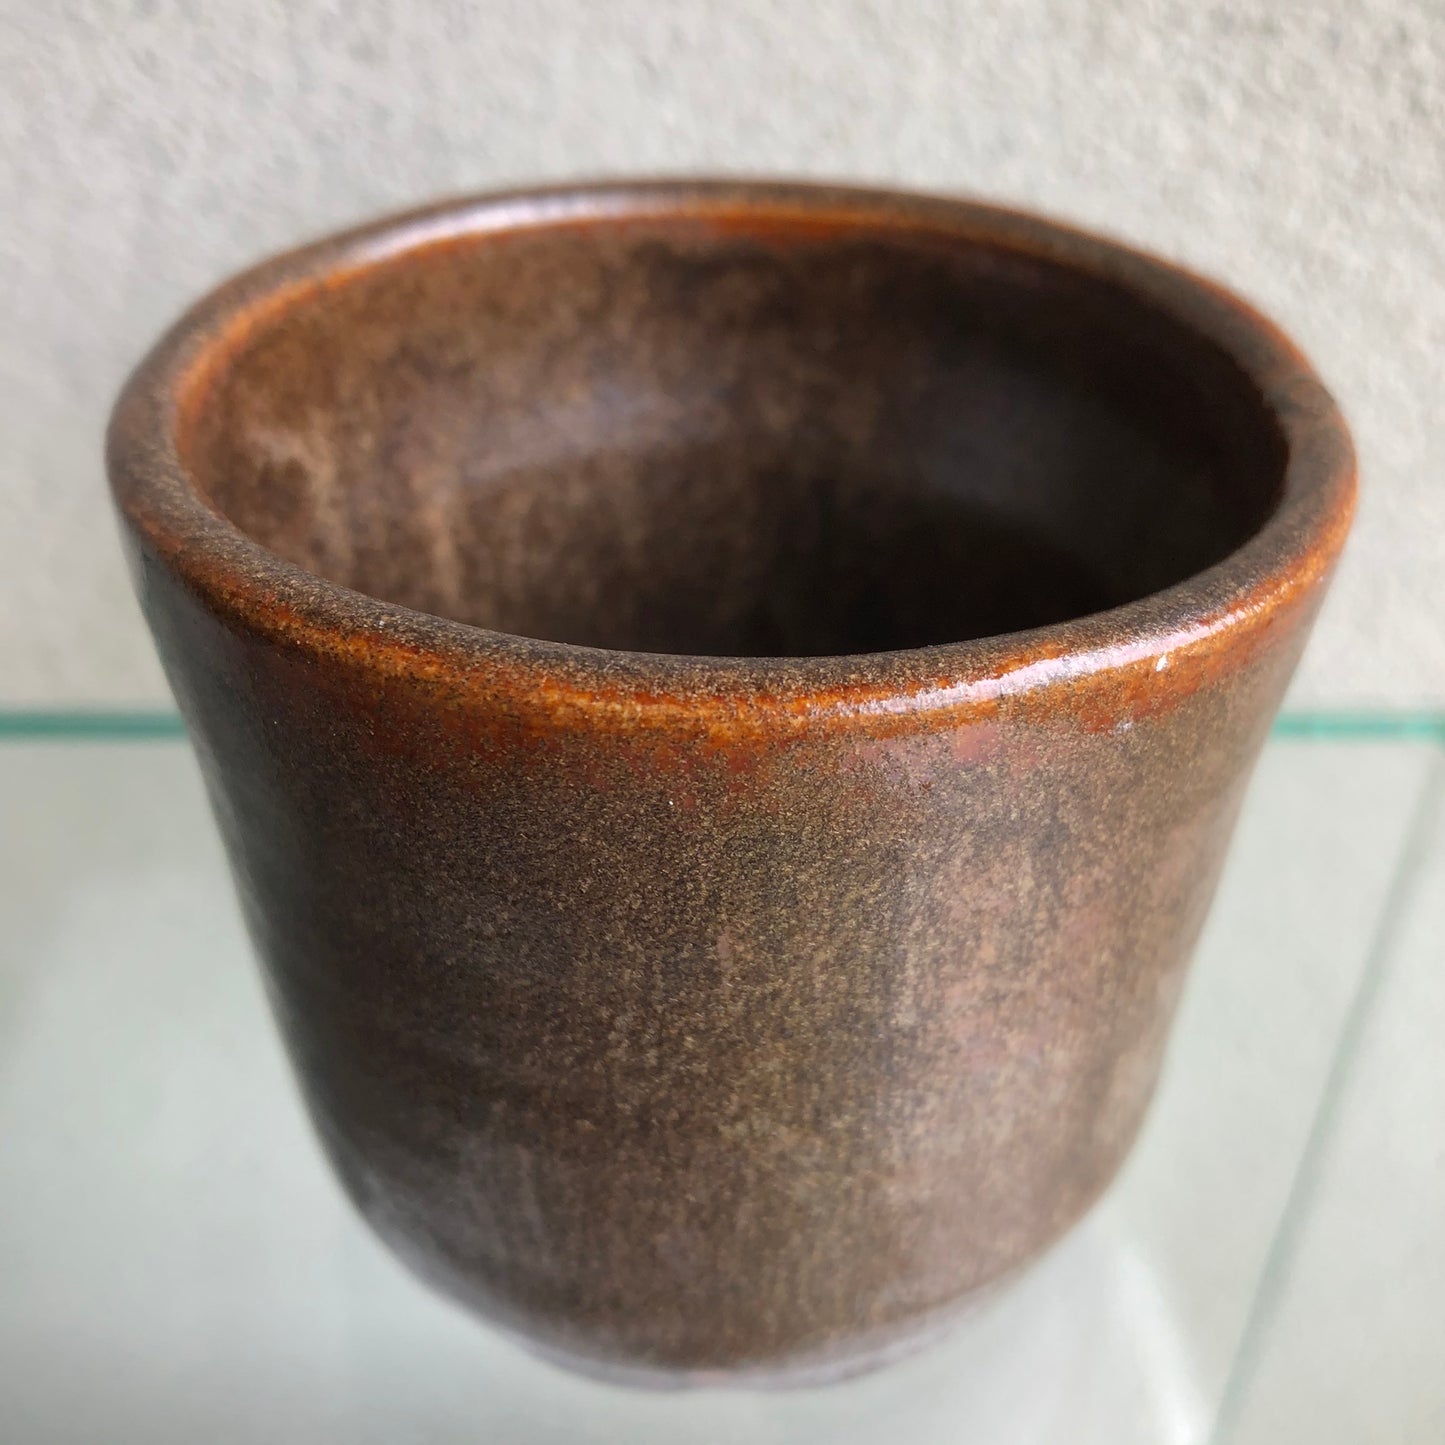 Beautifully glazed cup